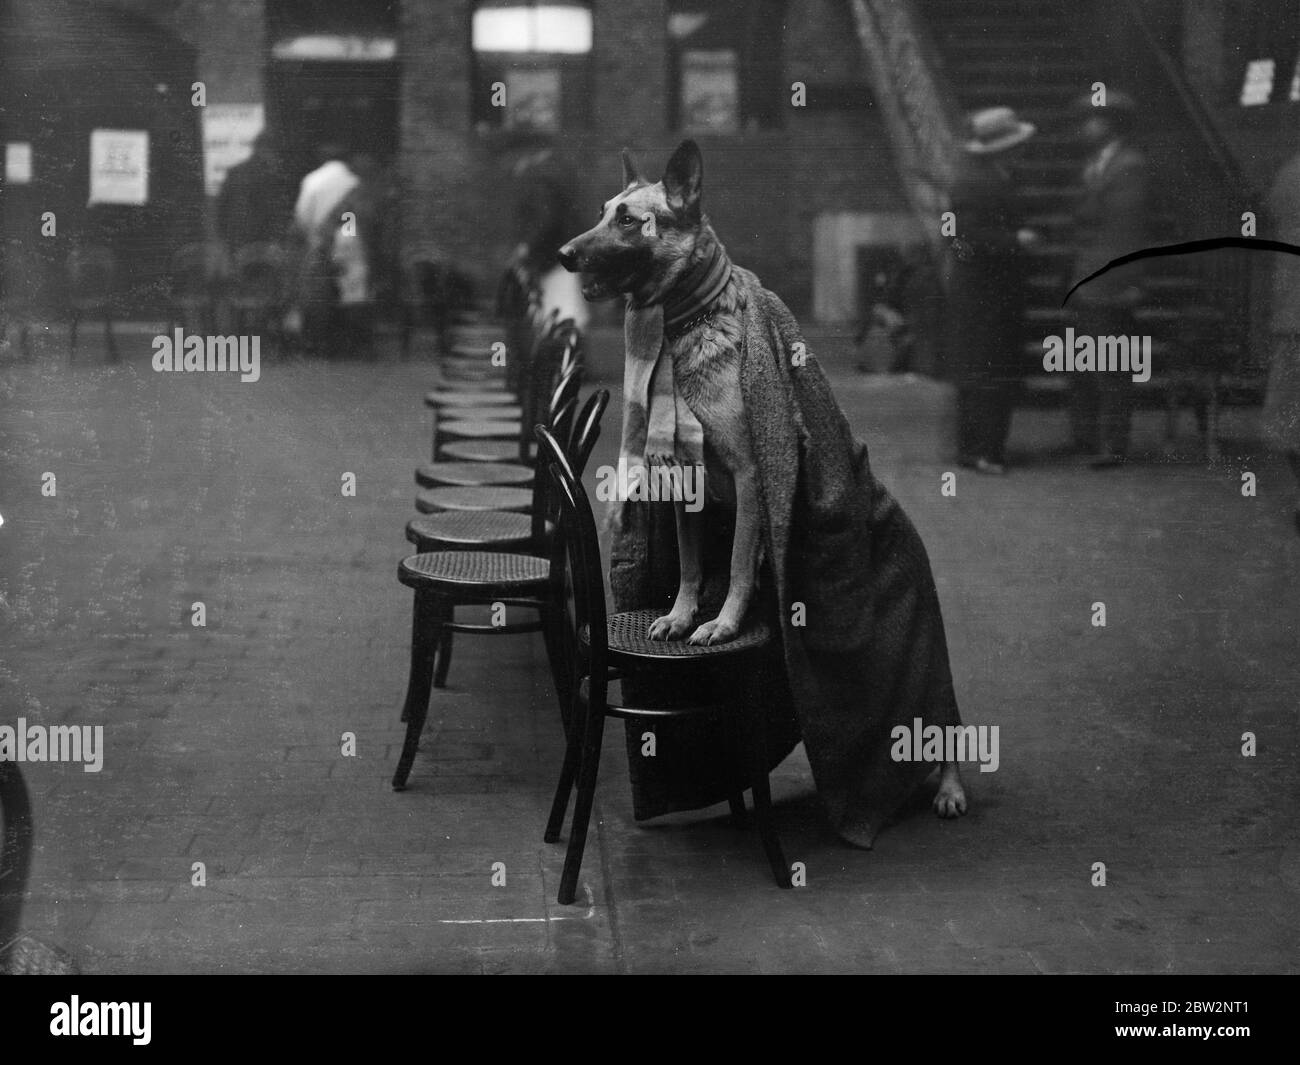 Watching the judging at the alsation show . Bruno of Shepherds Vale , owned by Mrs S G Kleeman , well wrapped up in rug and scarf , watching the judging at the Alsatian league championship show at Tattersall ' s , Knightsbridge , london . 24 February 1932 30s, 30's, 1930s, 1930's, thirties, nineteen thirties Stock Photo